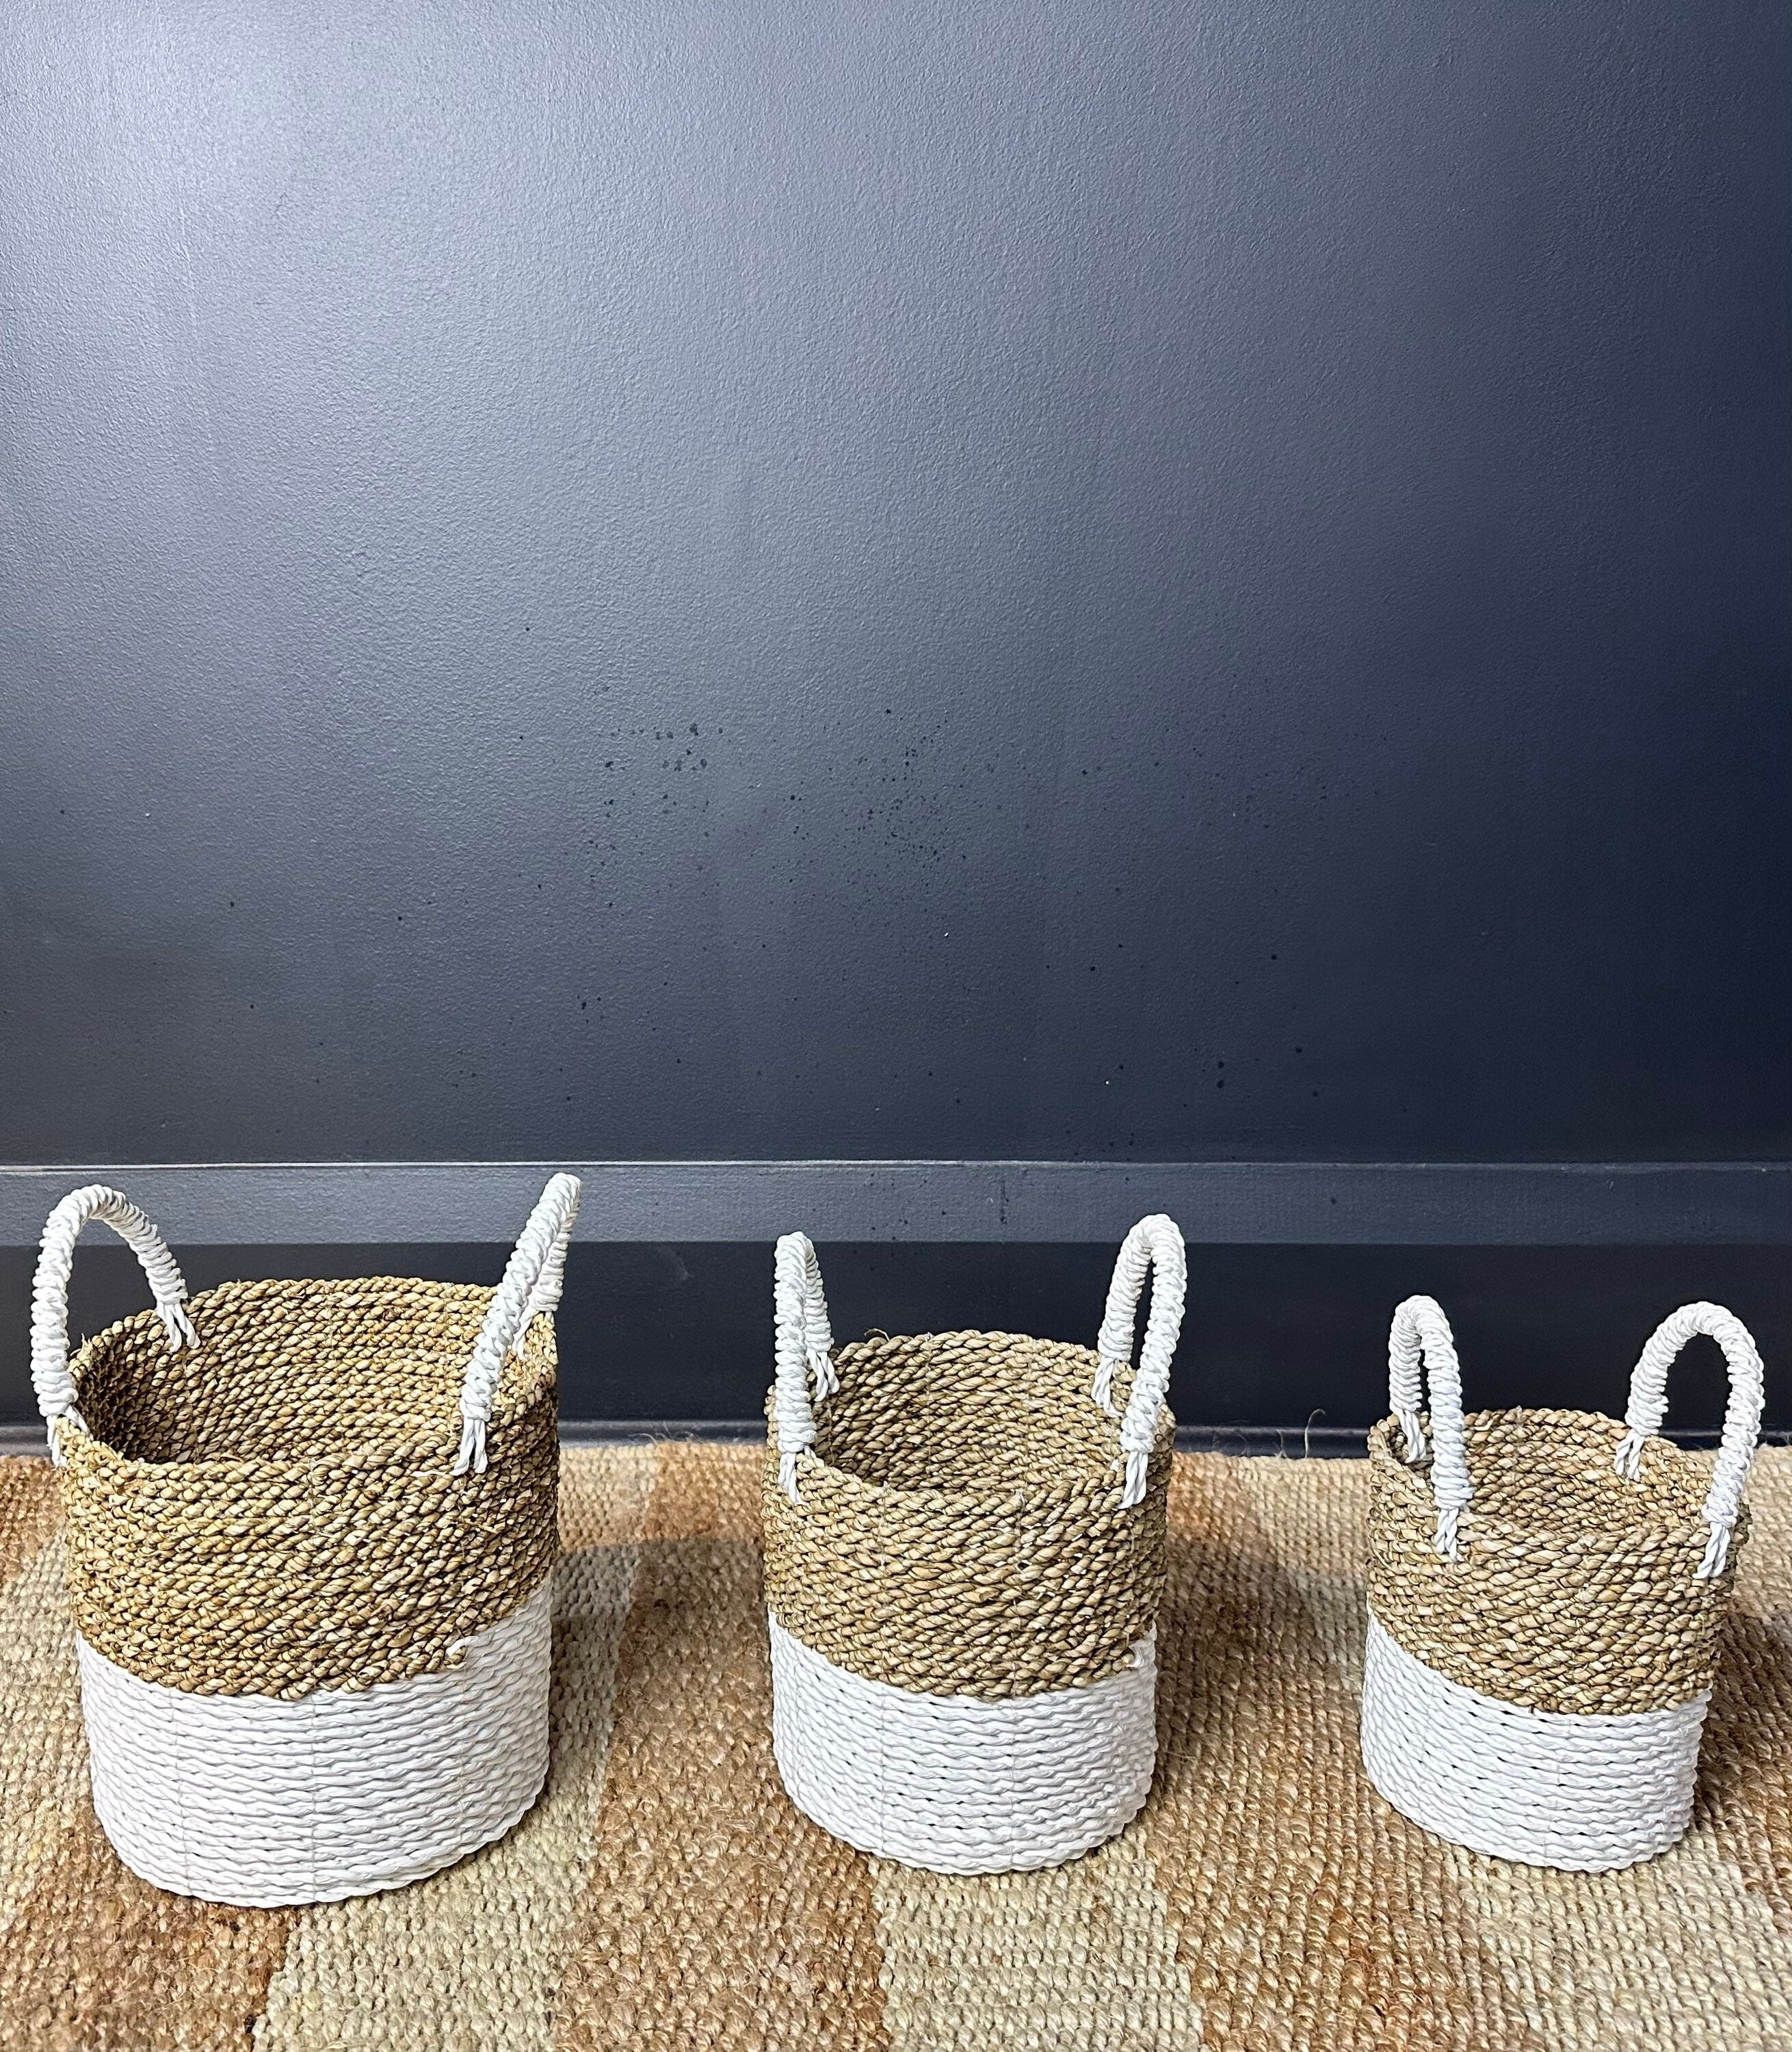 Two-tone Wicker Storage Basket Set of 3, Rattan Cylindrical Holder, Woven Supplies Holder